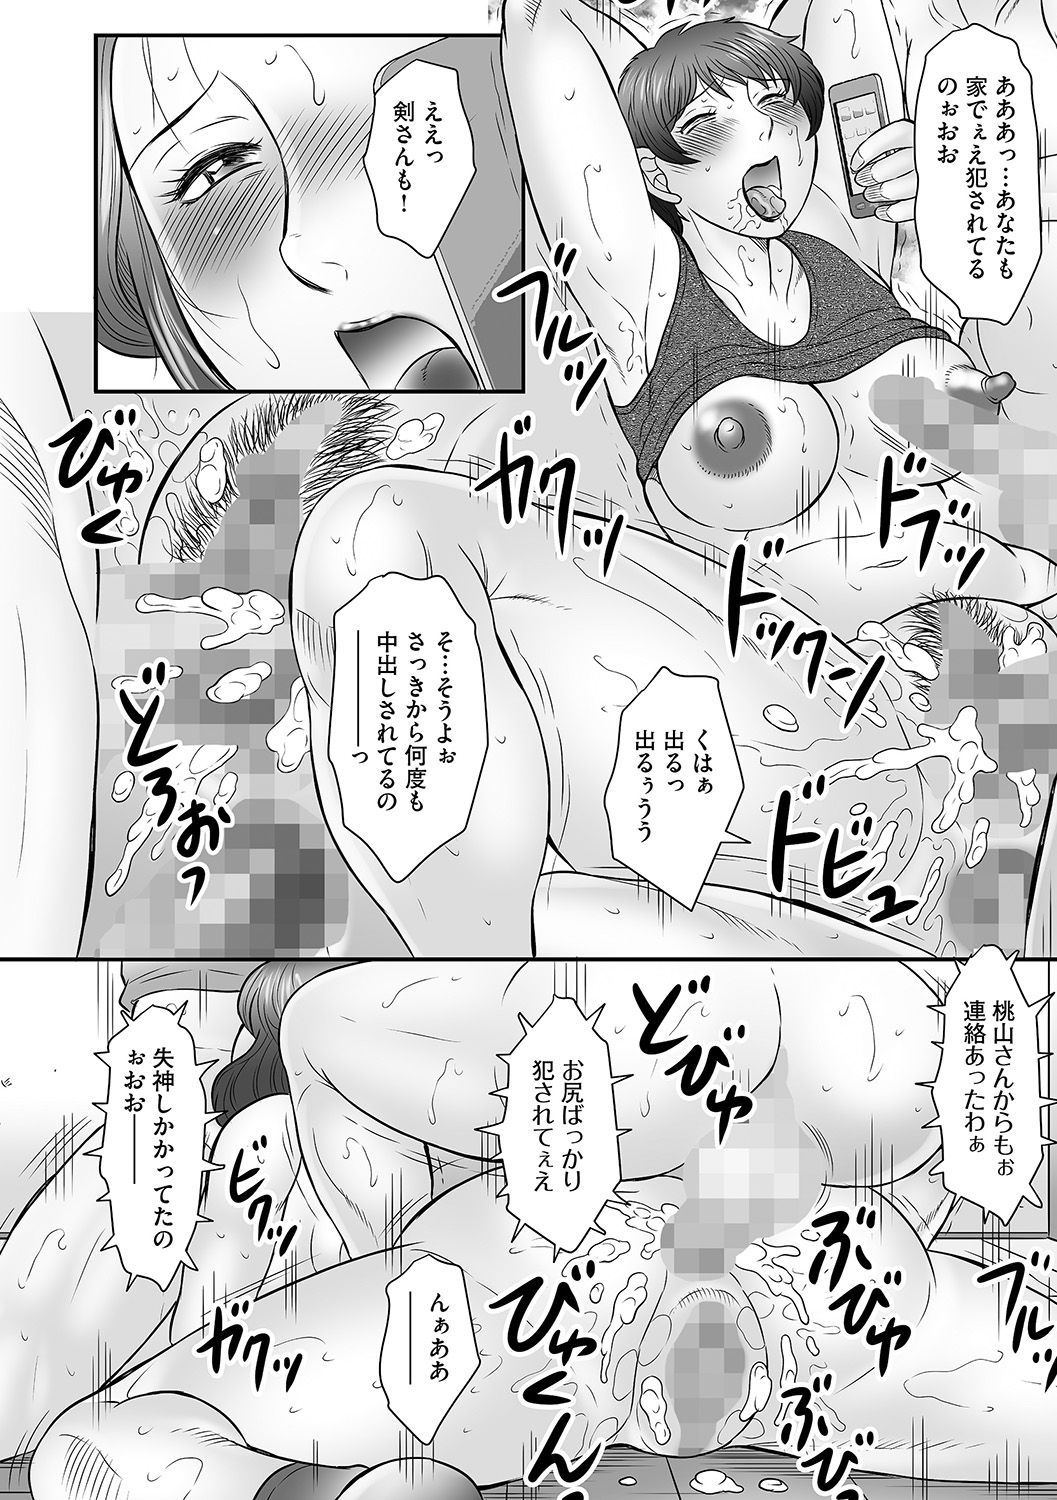 [Fuusen Club] Boshi no Susume - The advice of the mother and child Ch. 14 (Magazine Cyberia Vol. 73) [Digital] page 14 full